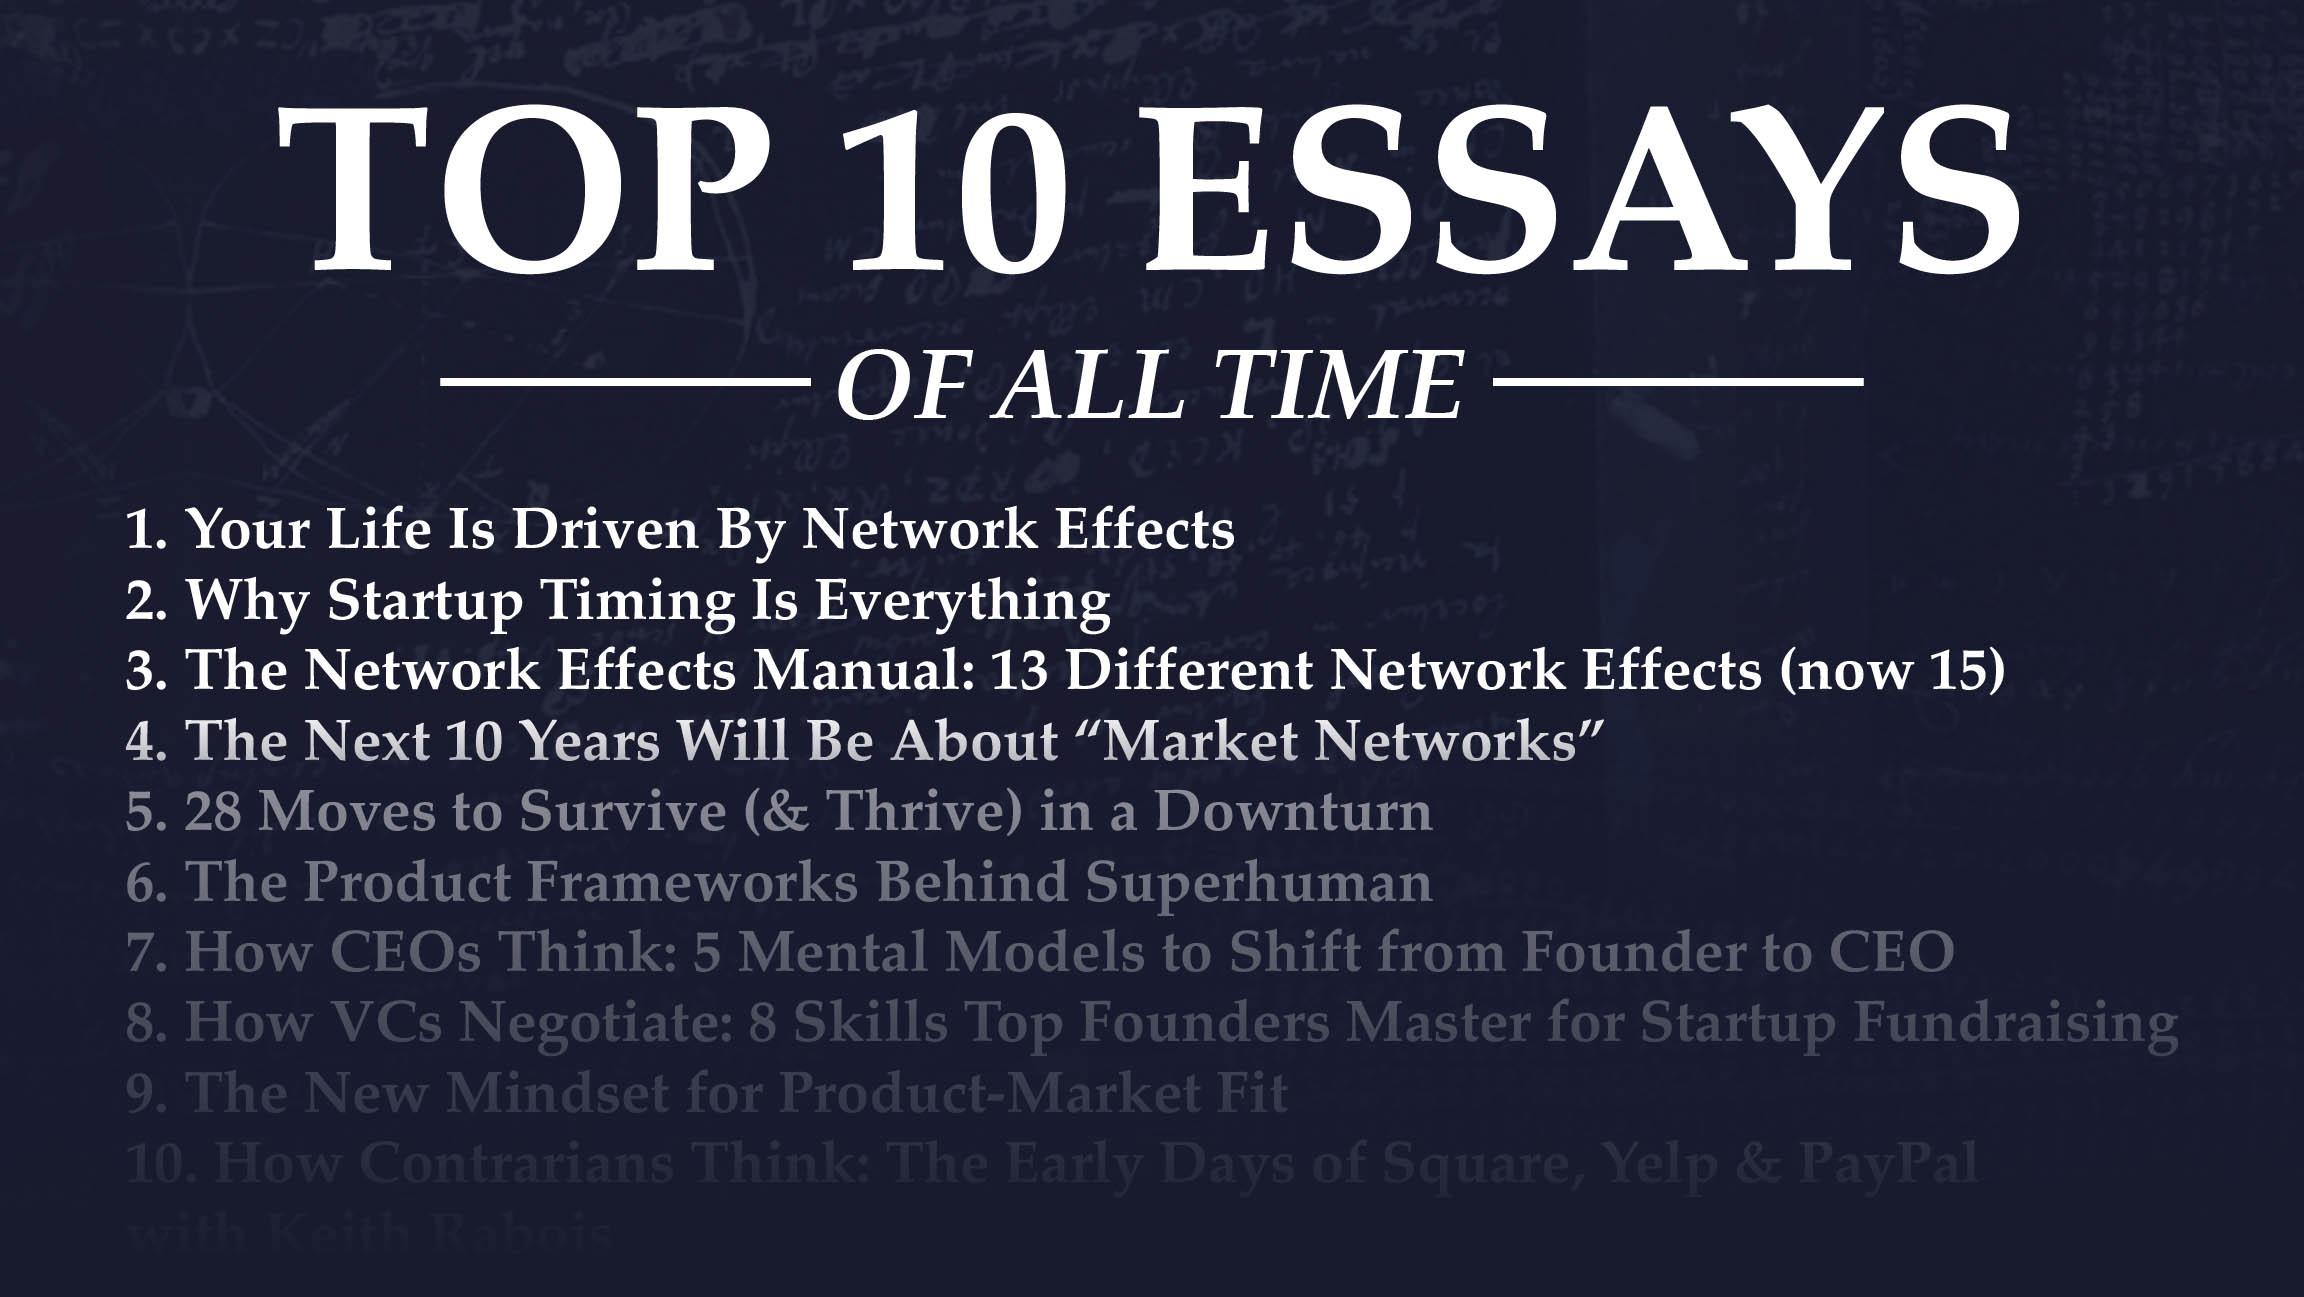 Top 10 Essays of all time